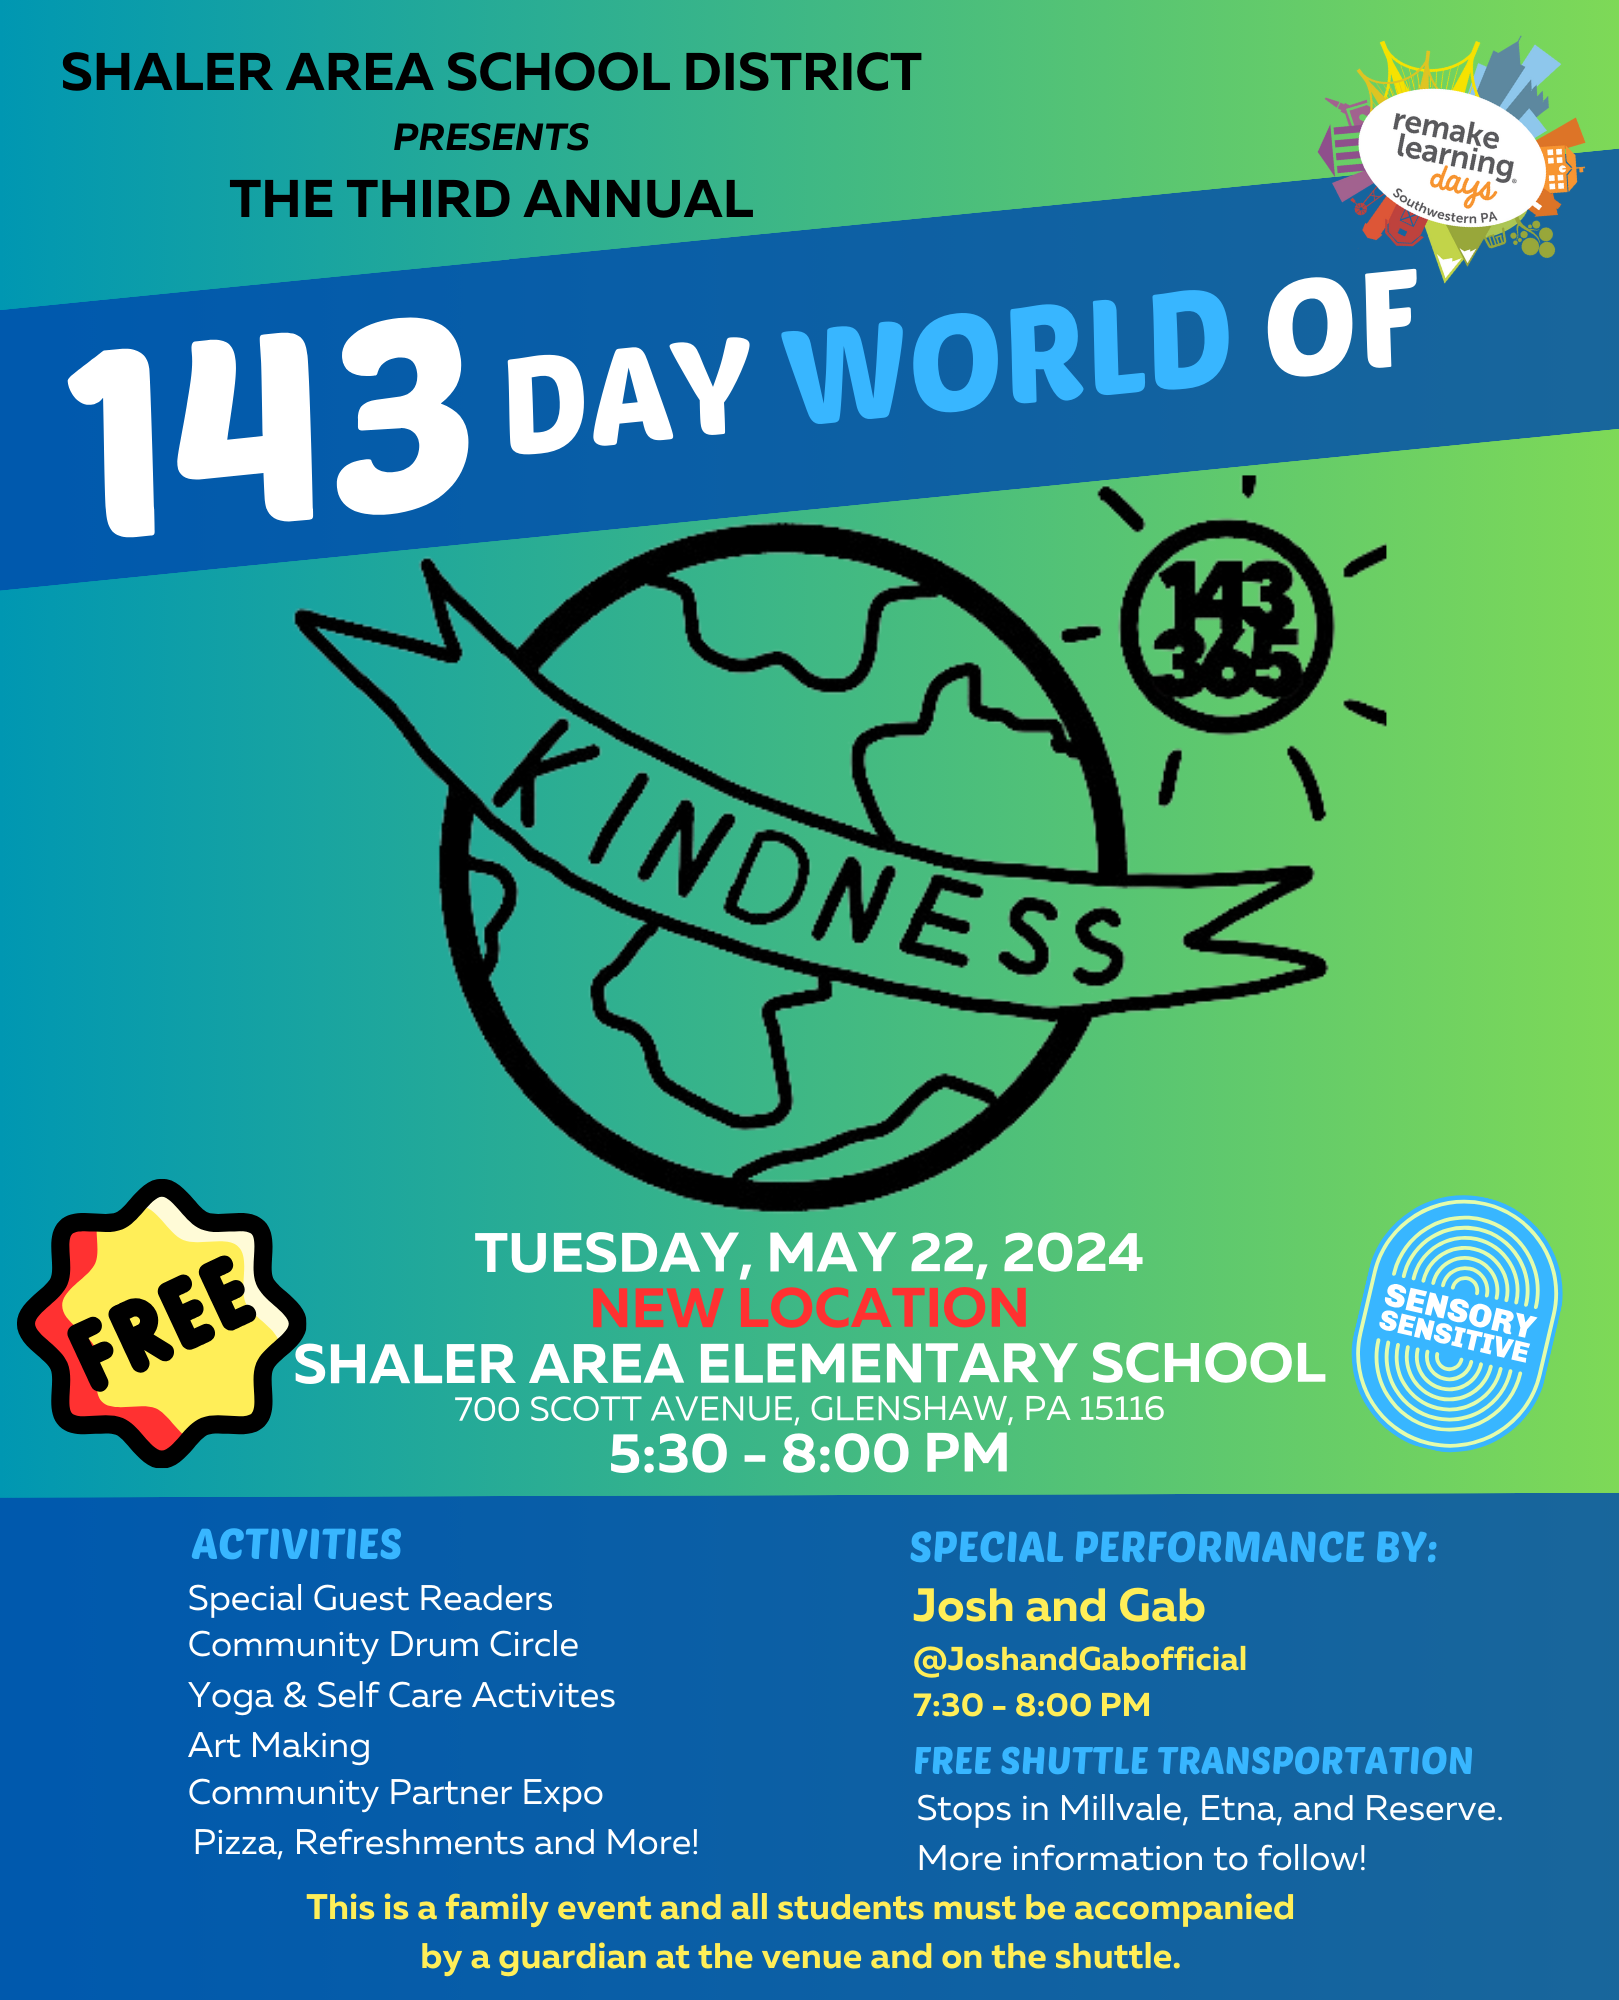 Image for Shaler Area School District 143 Day of Kindness Event